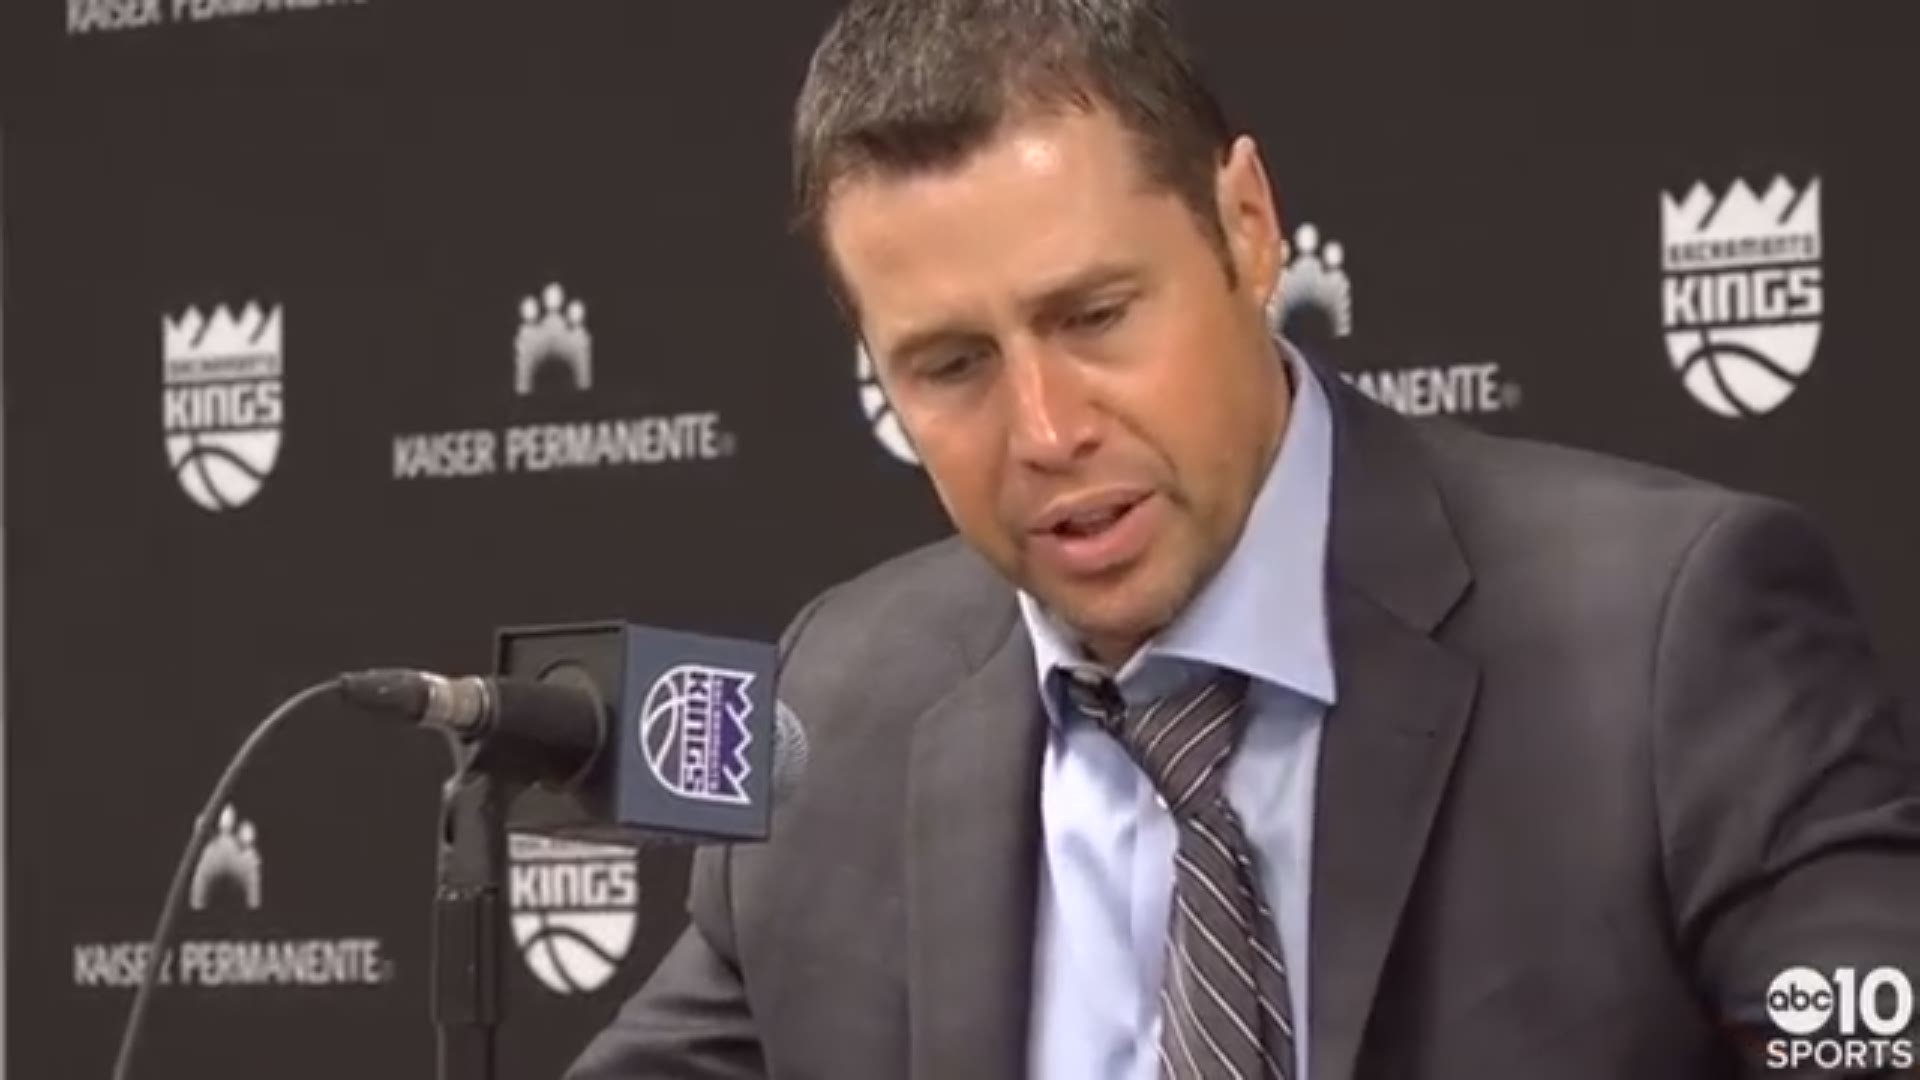 Kings head coach Dave Joerger talks about the struggle to begin Friday's game against Miami, the performance from his new players Harrison Barnes and Alec Burks, and recording their 29th win of the season over the Miami Heat on Friday.